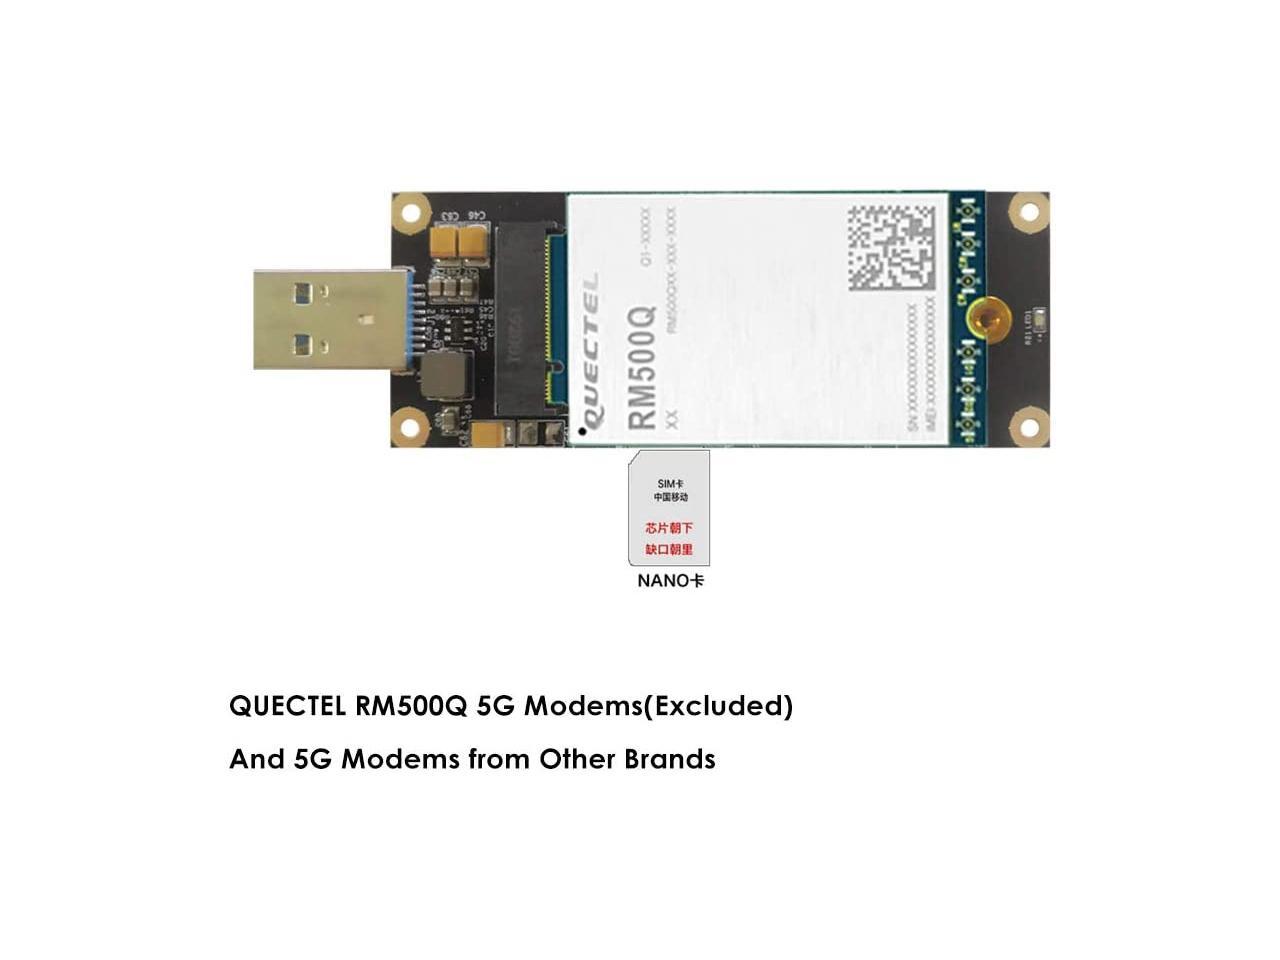 EXVIST 5G LTE Industrial M.2(NGFF) to USB3.0 Adapter W/Nano SIM Card Slot  for 5G LTE Module Like Quectel RM500Q etc. Applicable for M2M  IoT  Applications Like Raspberry Pi Industrial Router etc. -